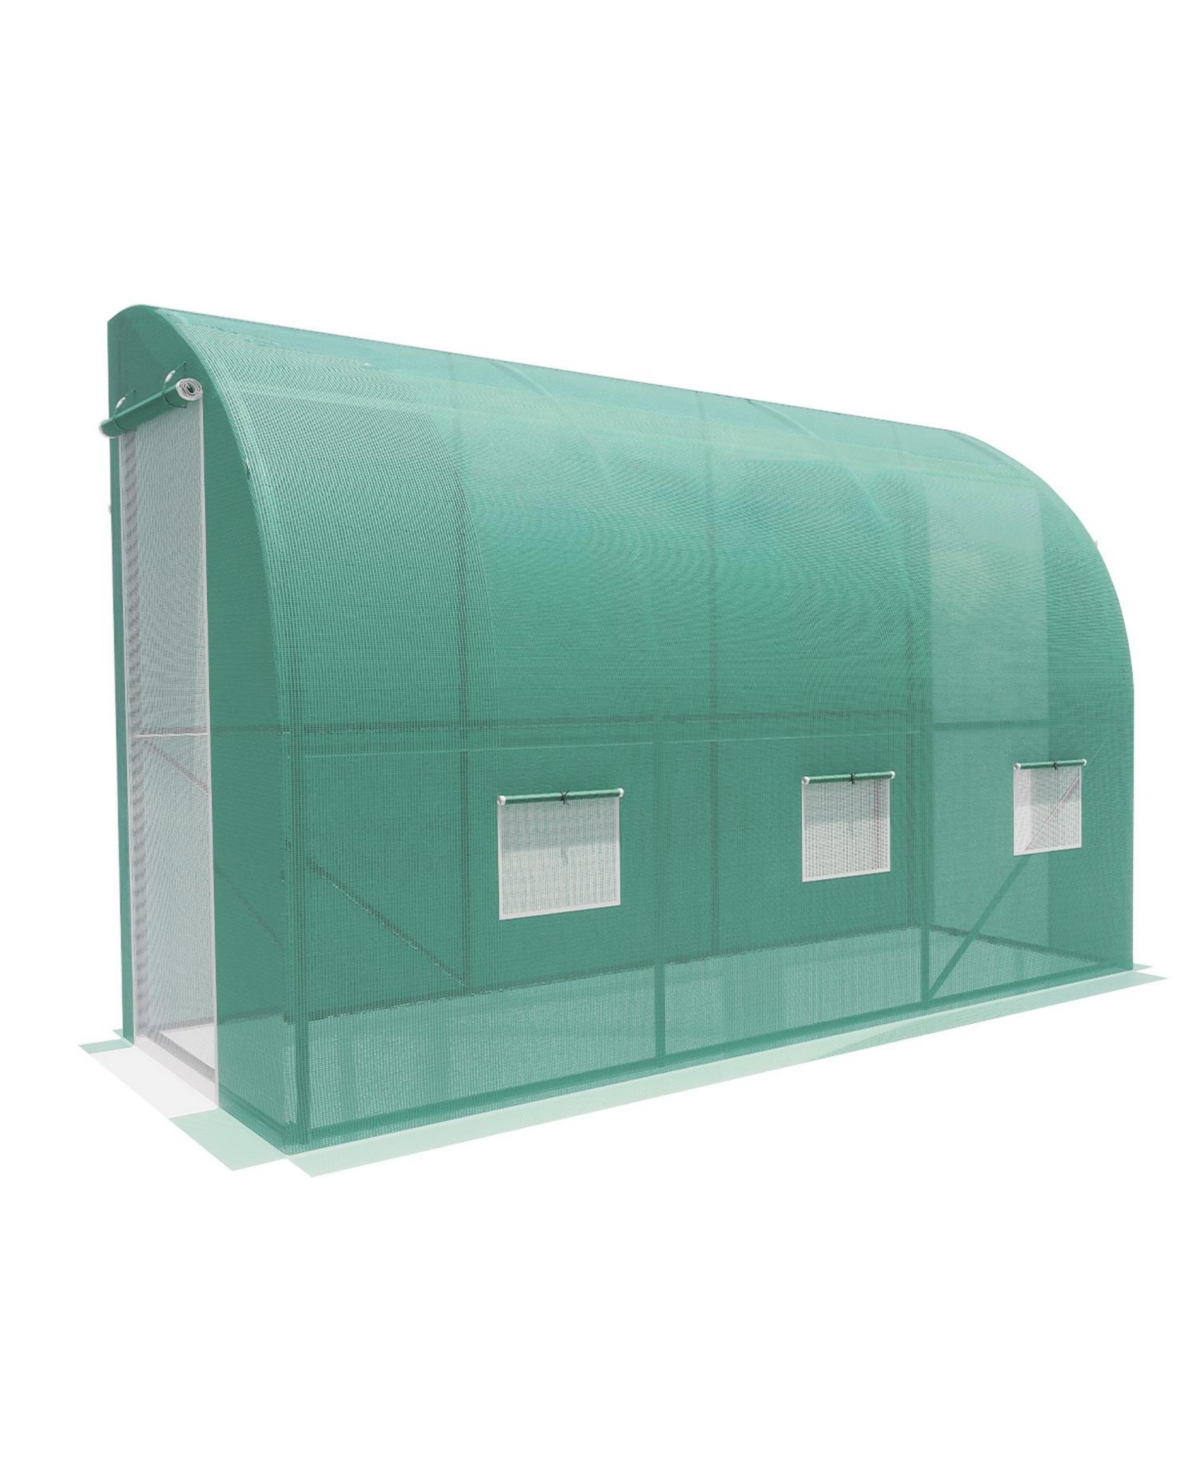 9.65' x 4.79' x7.05' Lean-to Walk-in Greenhouse for Plants, Outdoor Stable Greenhouse with 2 Roll-up Zipper Doors, 3 Window, 4 Windproof Ropes